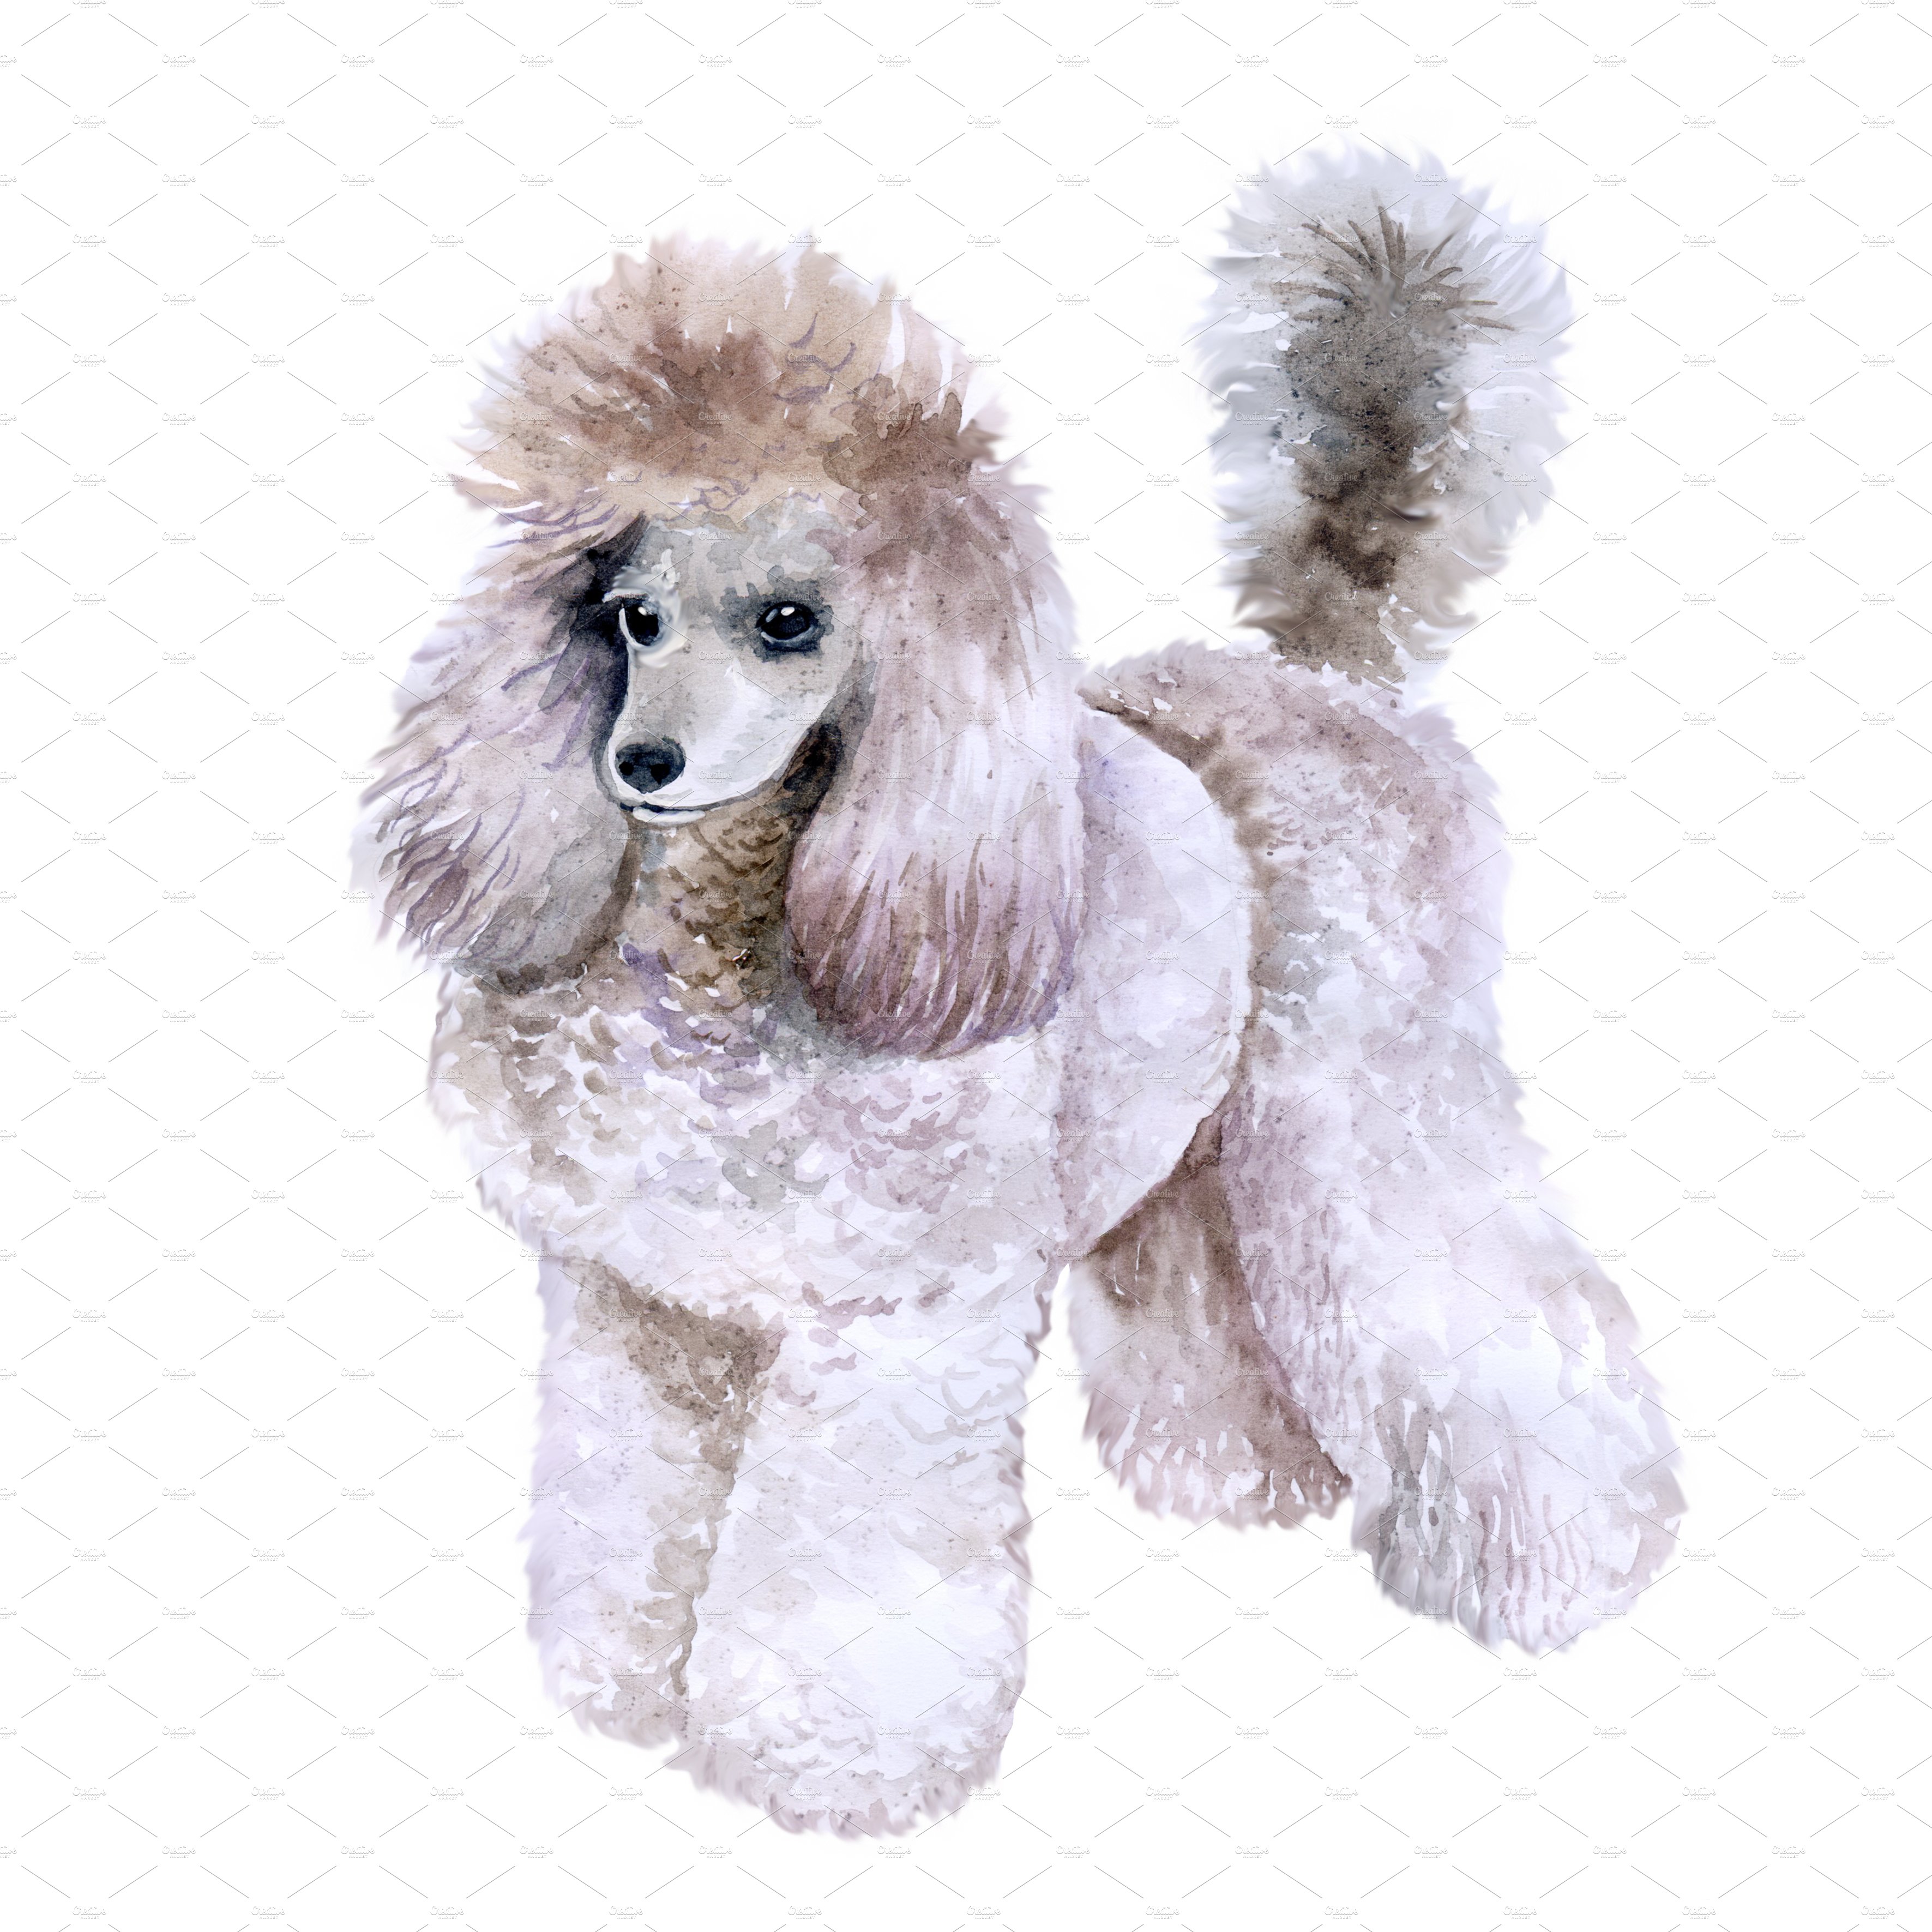 41. king poodle 28129 png 820